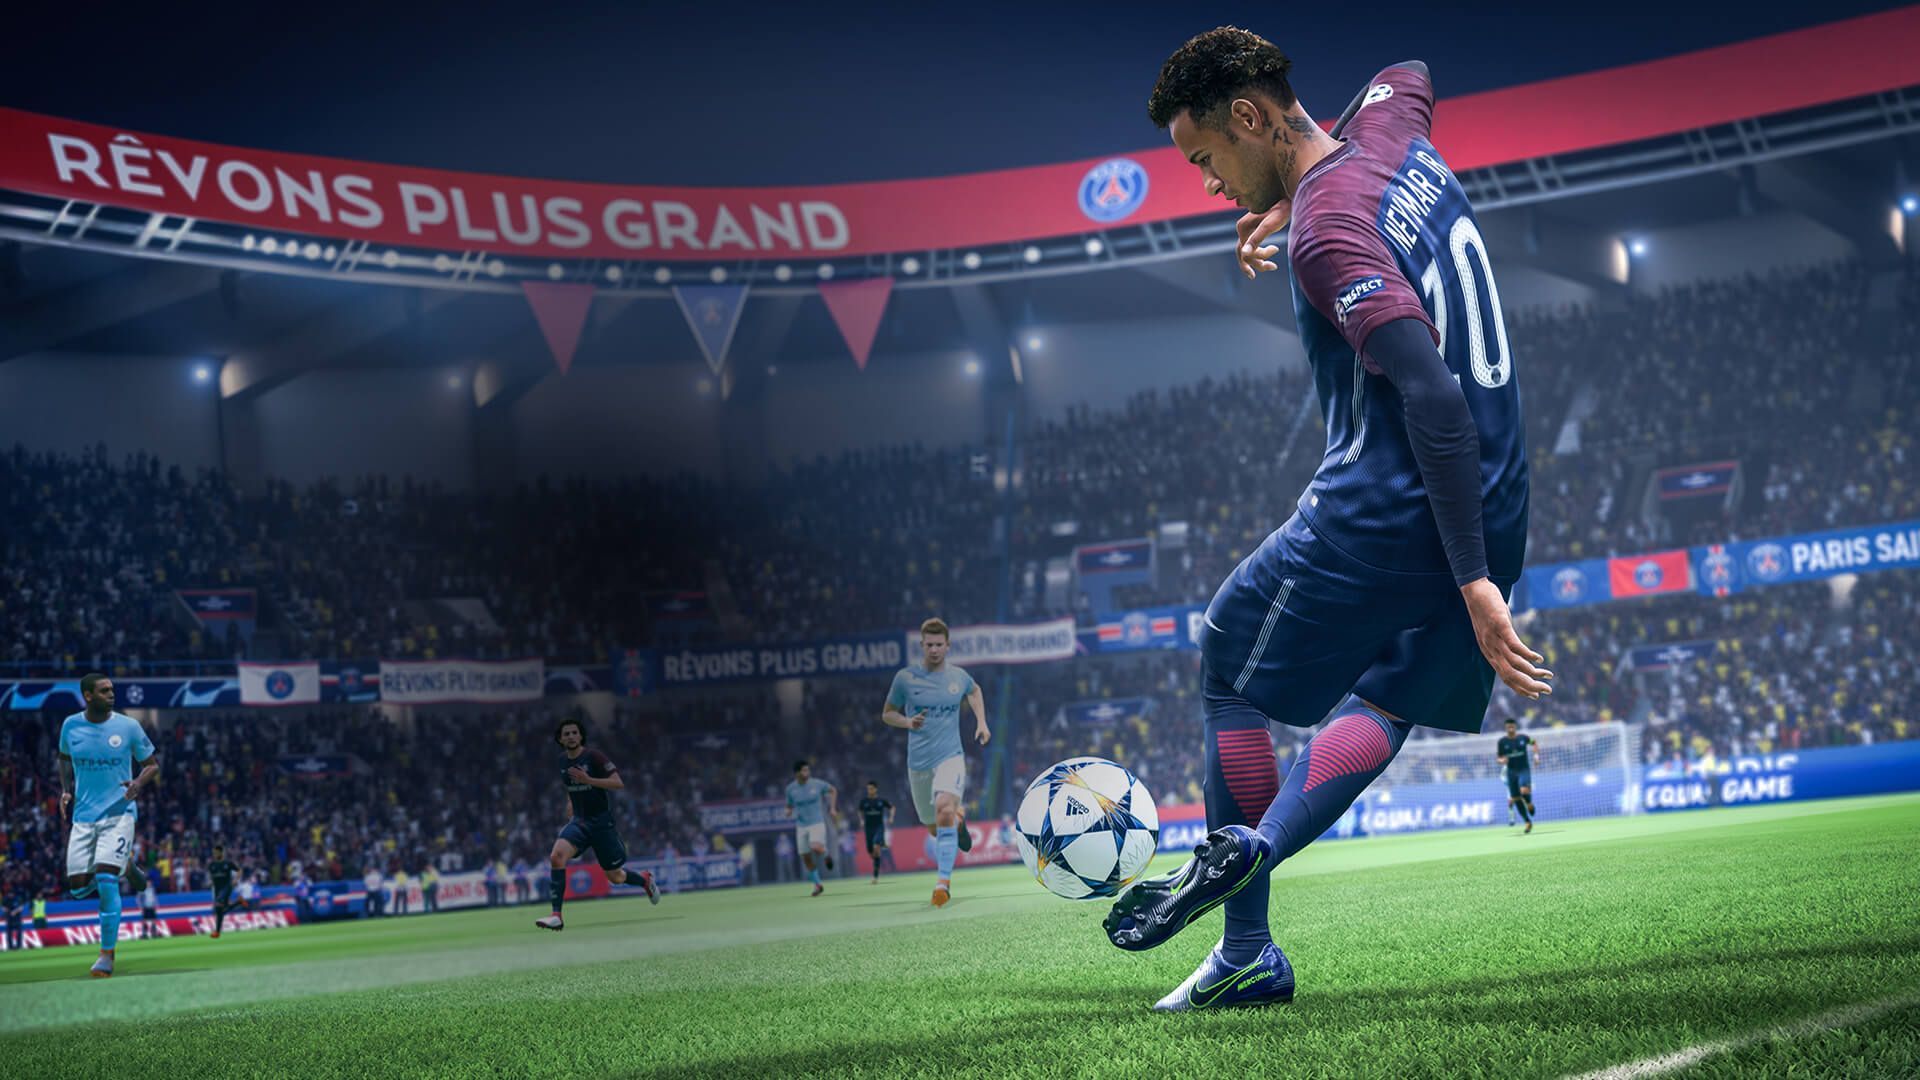 FIFA 19 Wallpapers